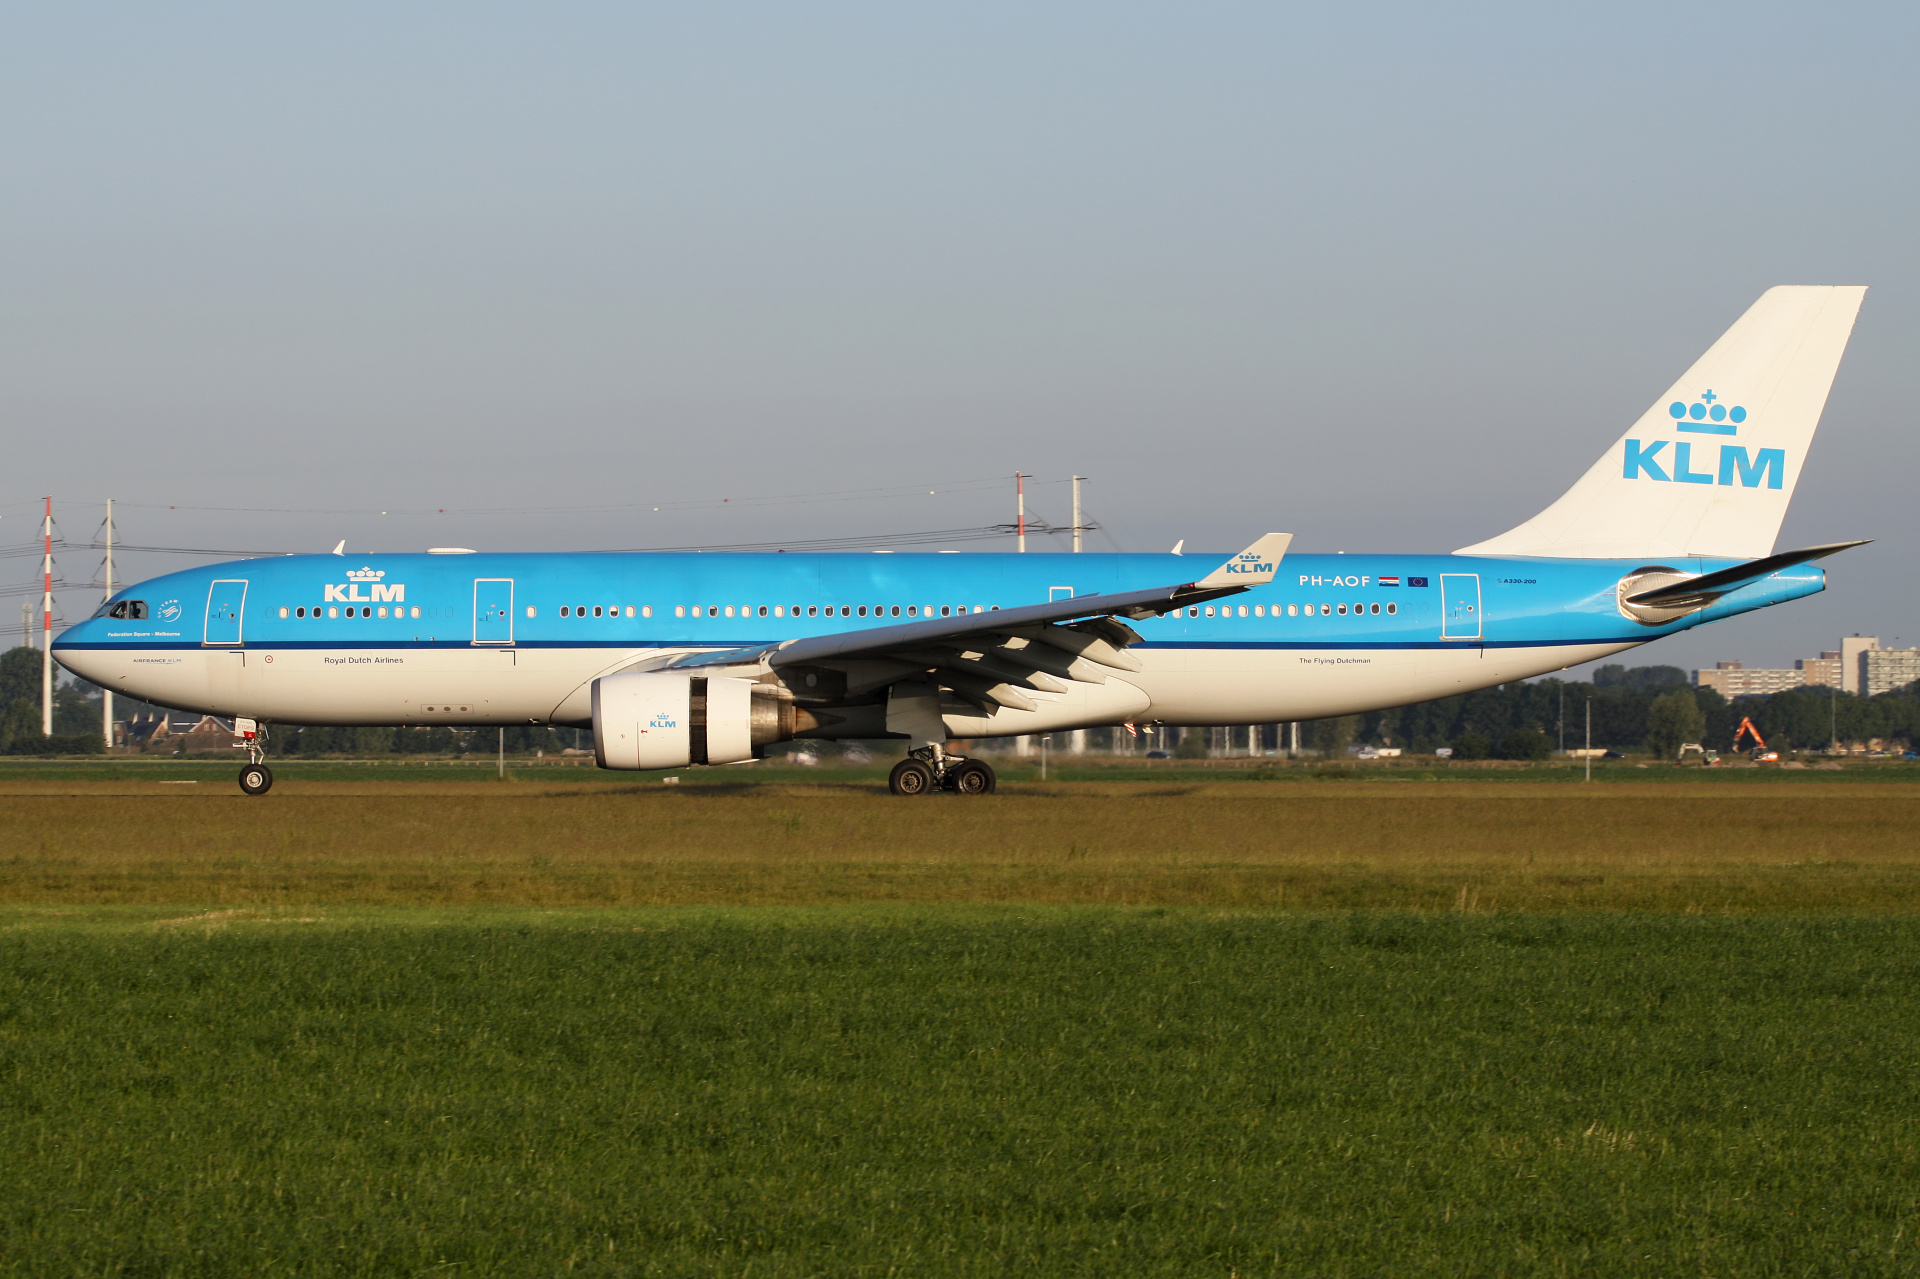 PH-AOF (Aircraft » Schiphol Spotting » Airbus A330-200 » KLM Royal Dutch Airlines)